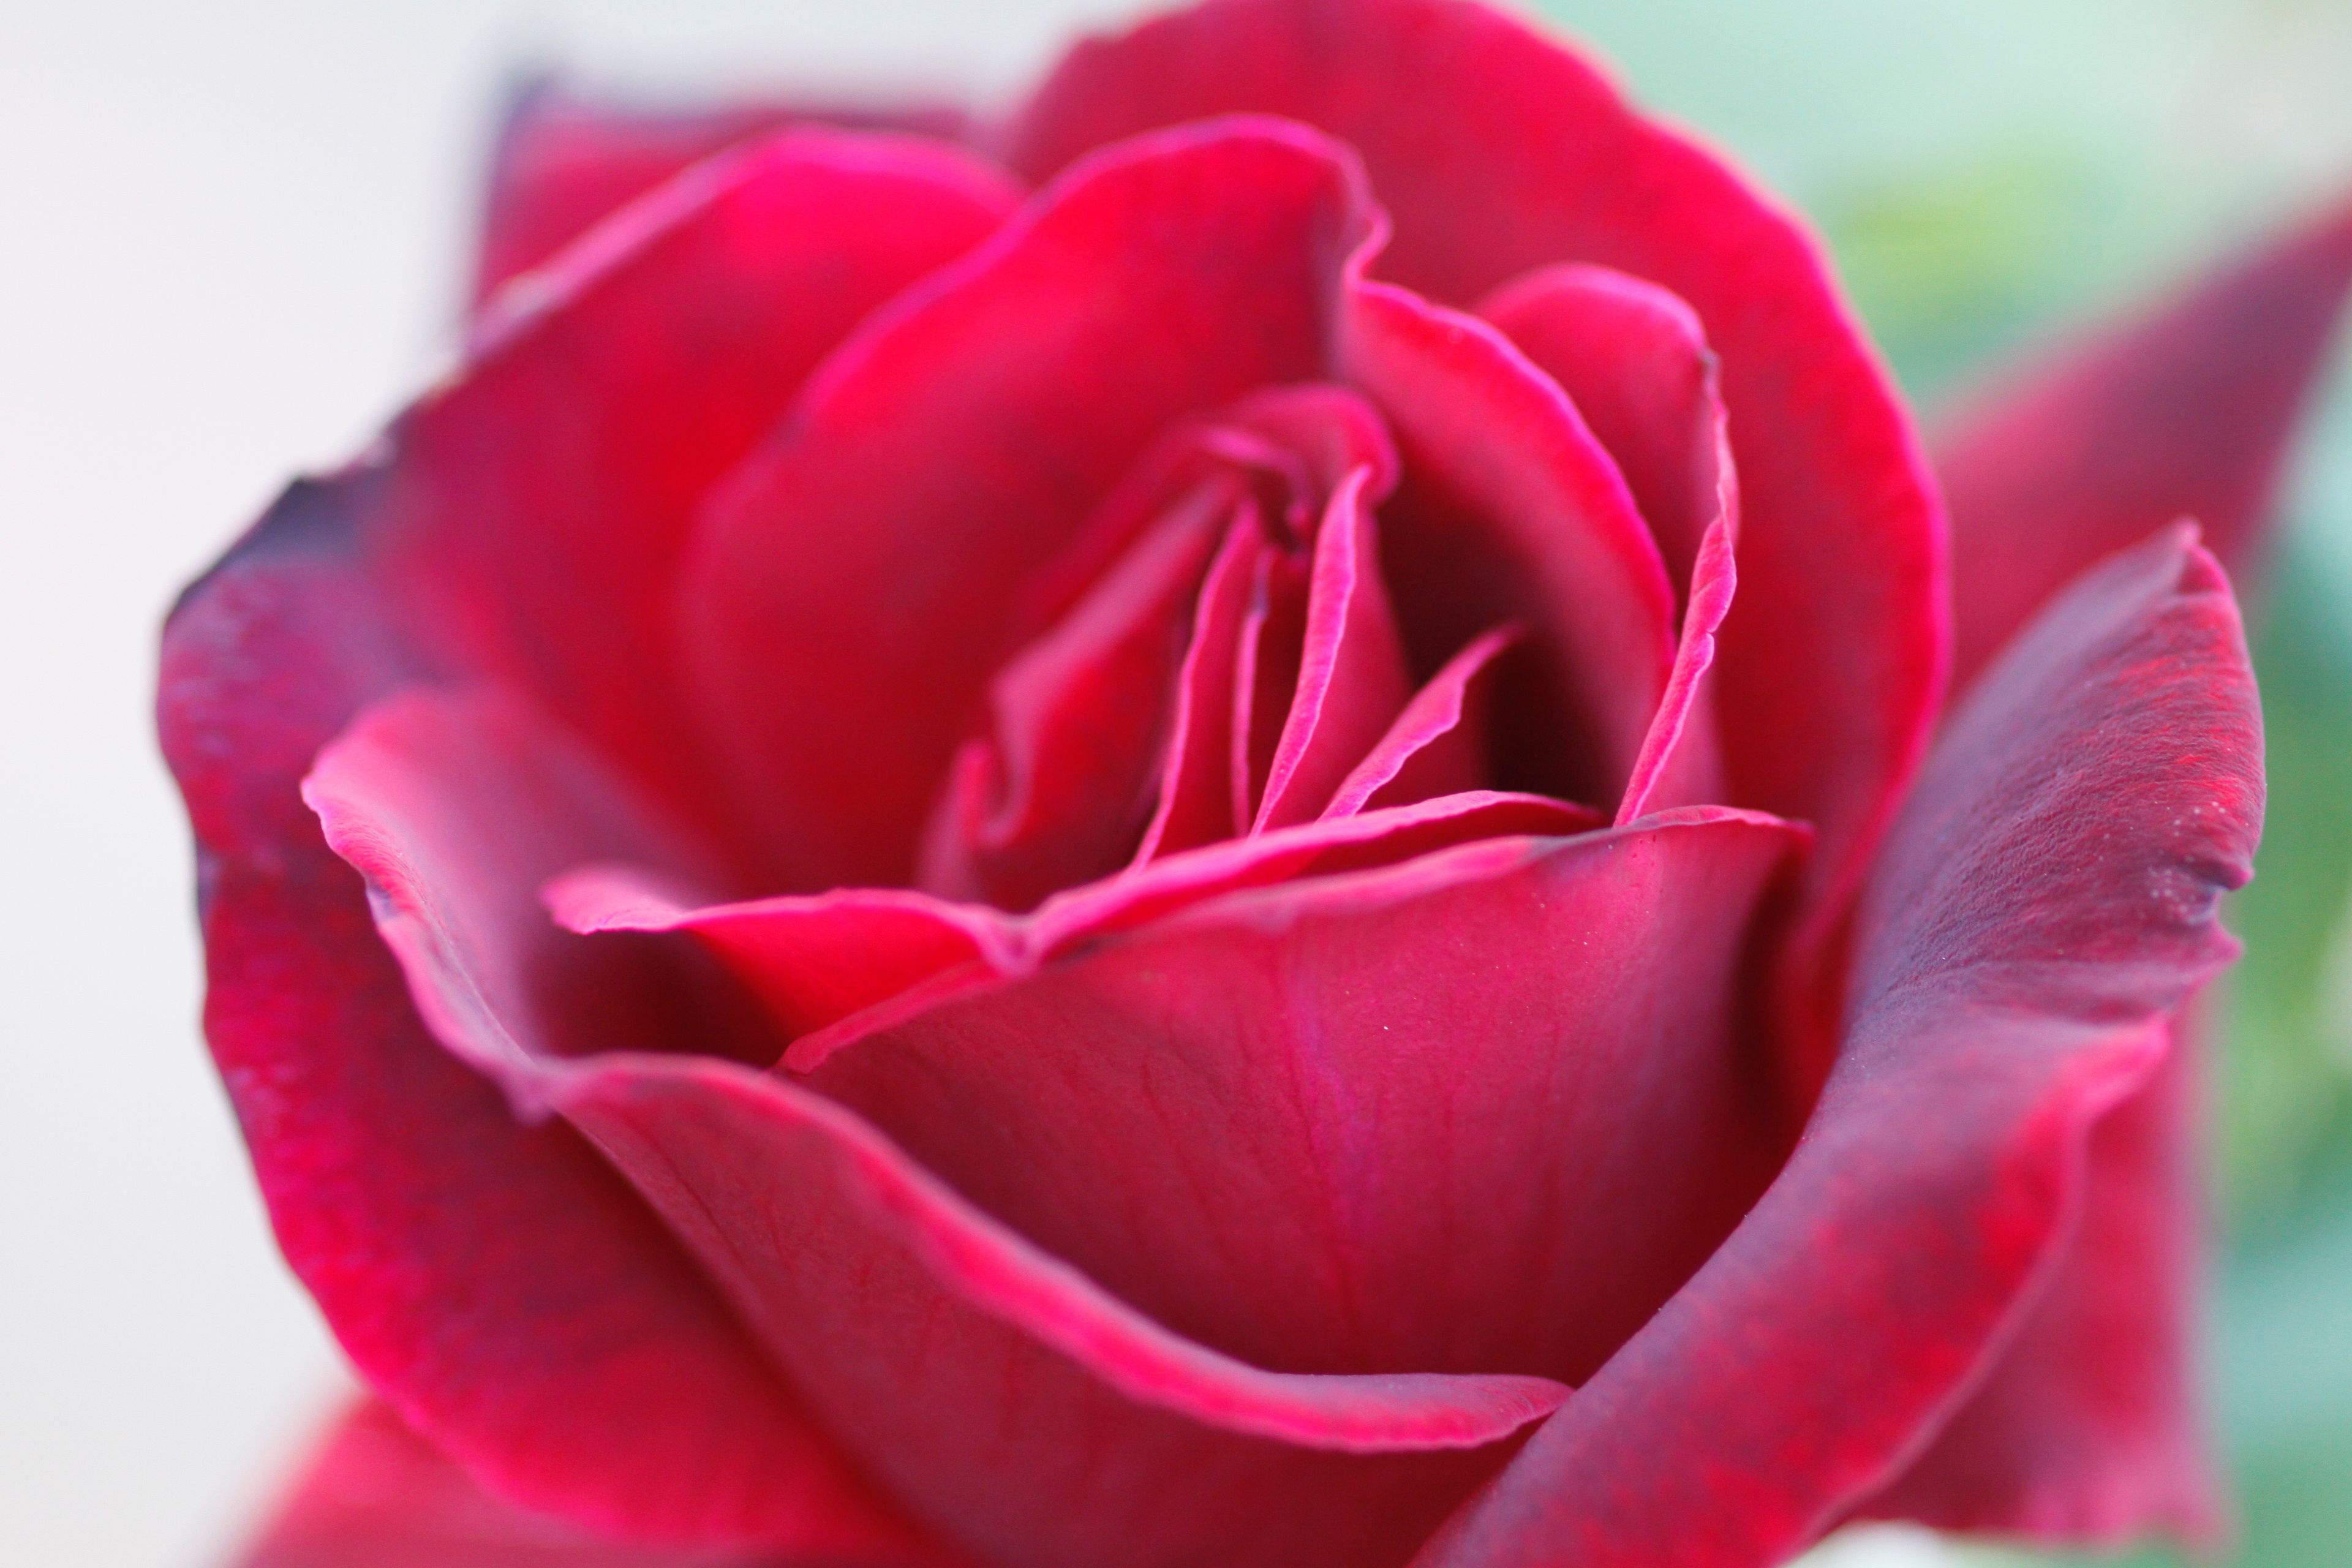 A close-up image of a red rose.